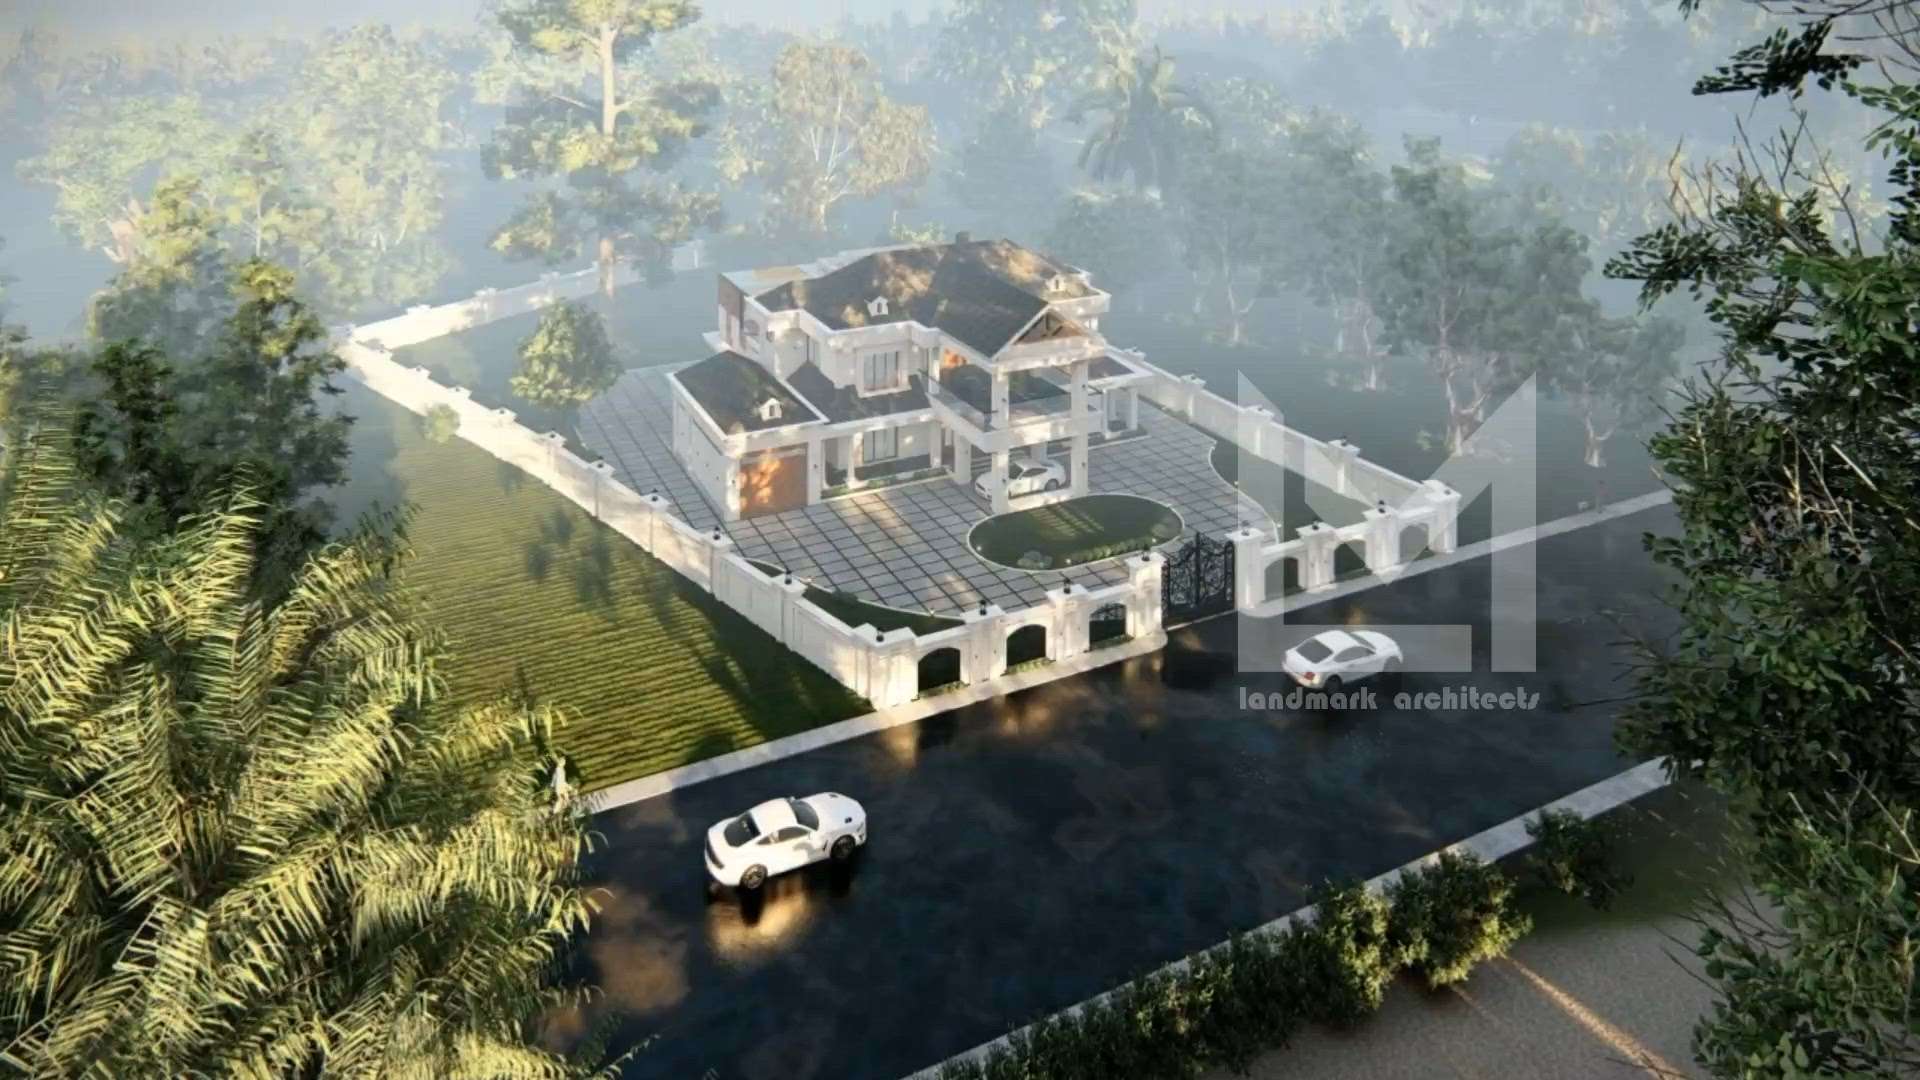 3D Visualization for an upcoming residence at Kottarakkara.

Our Architectural 3D visualization bring your vision to reality. Contact us today and let's create something amazing together!
Contact: +91 9446070012, +91 9207855254

 #Architect #kerala_architecture #3dvisualizer #3Dvisualization #KeralaStyleHouse #luxuaryrealestate #HouseConstruction #architecturedesigns